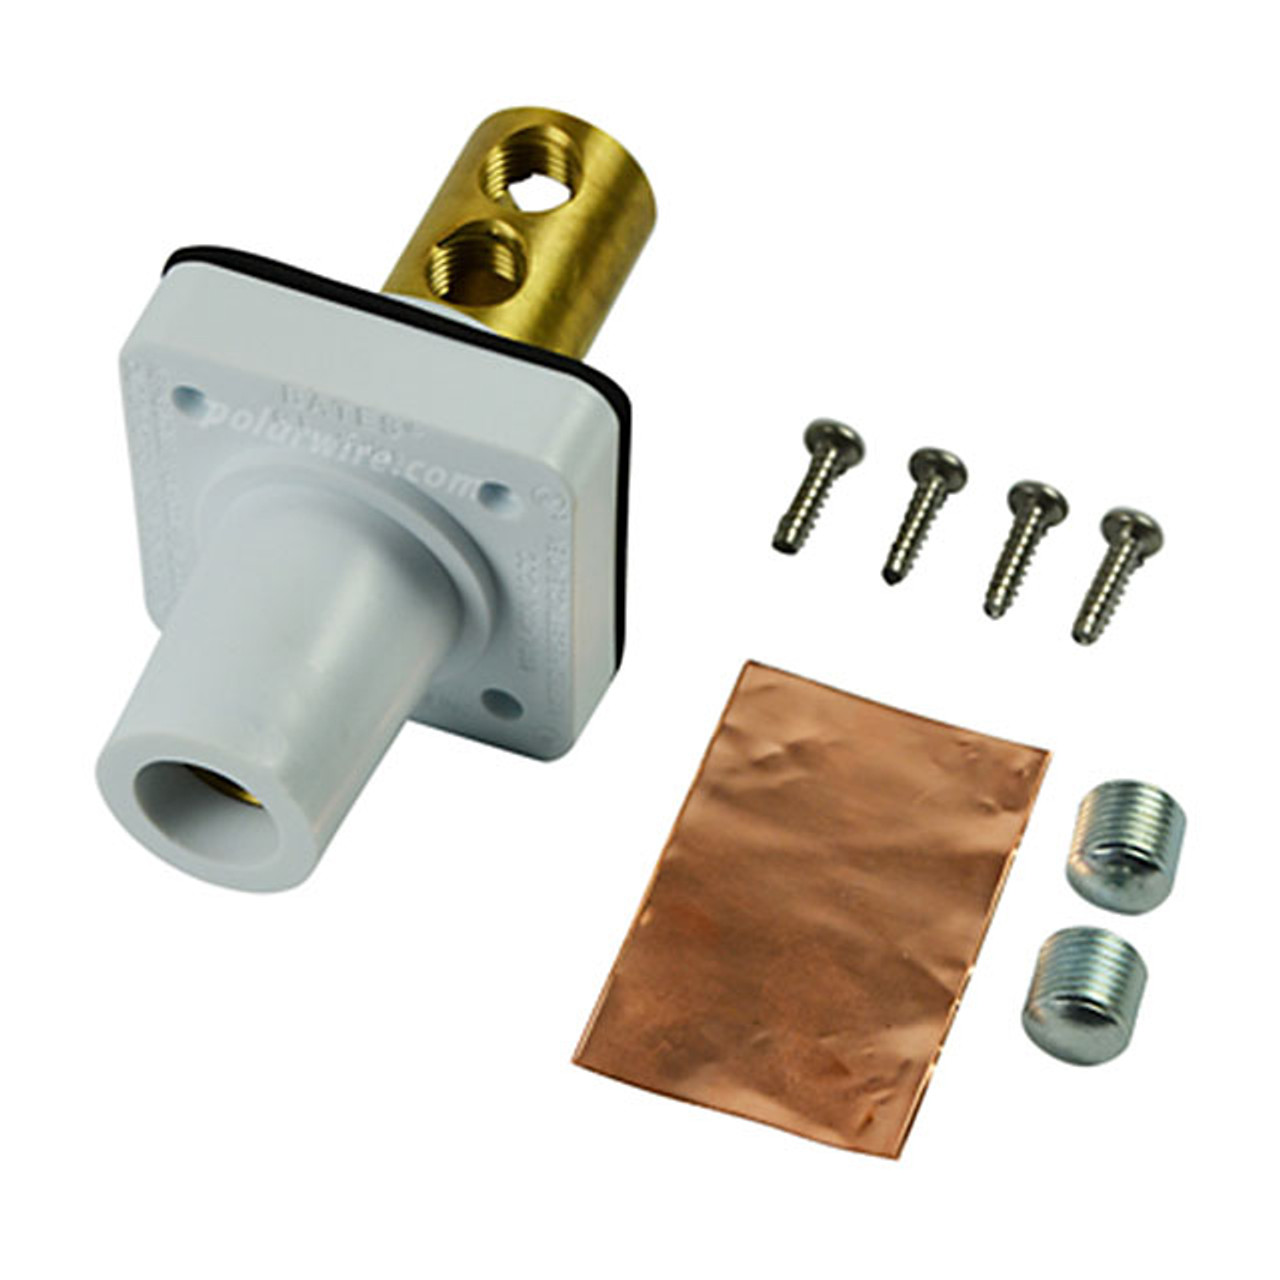 Marinco white 400A CL 16 Series female single pin panel mount cam lock connector with set screw for 2-2/0 AWG cable